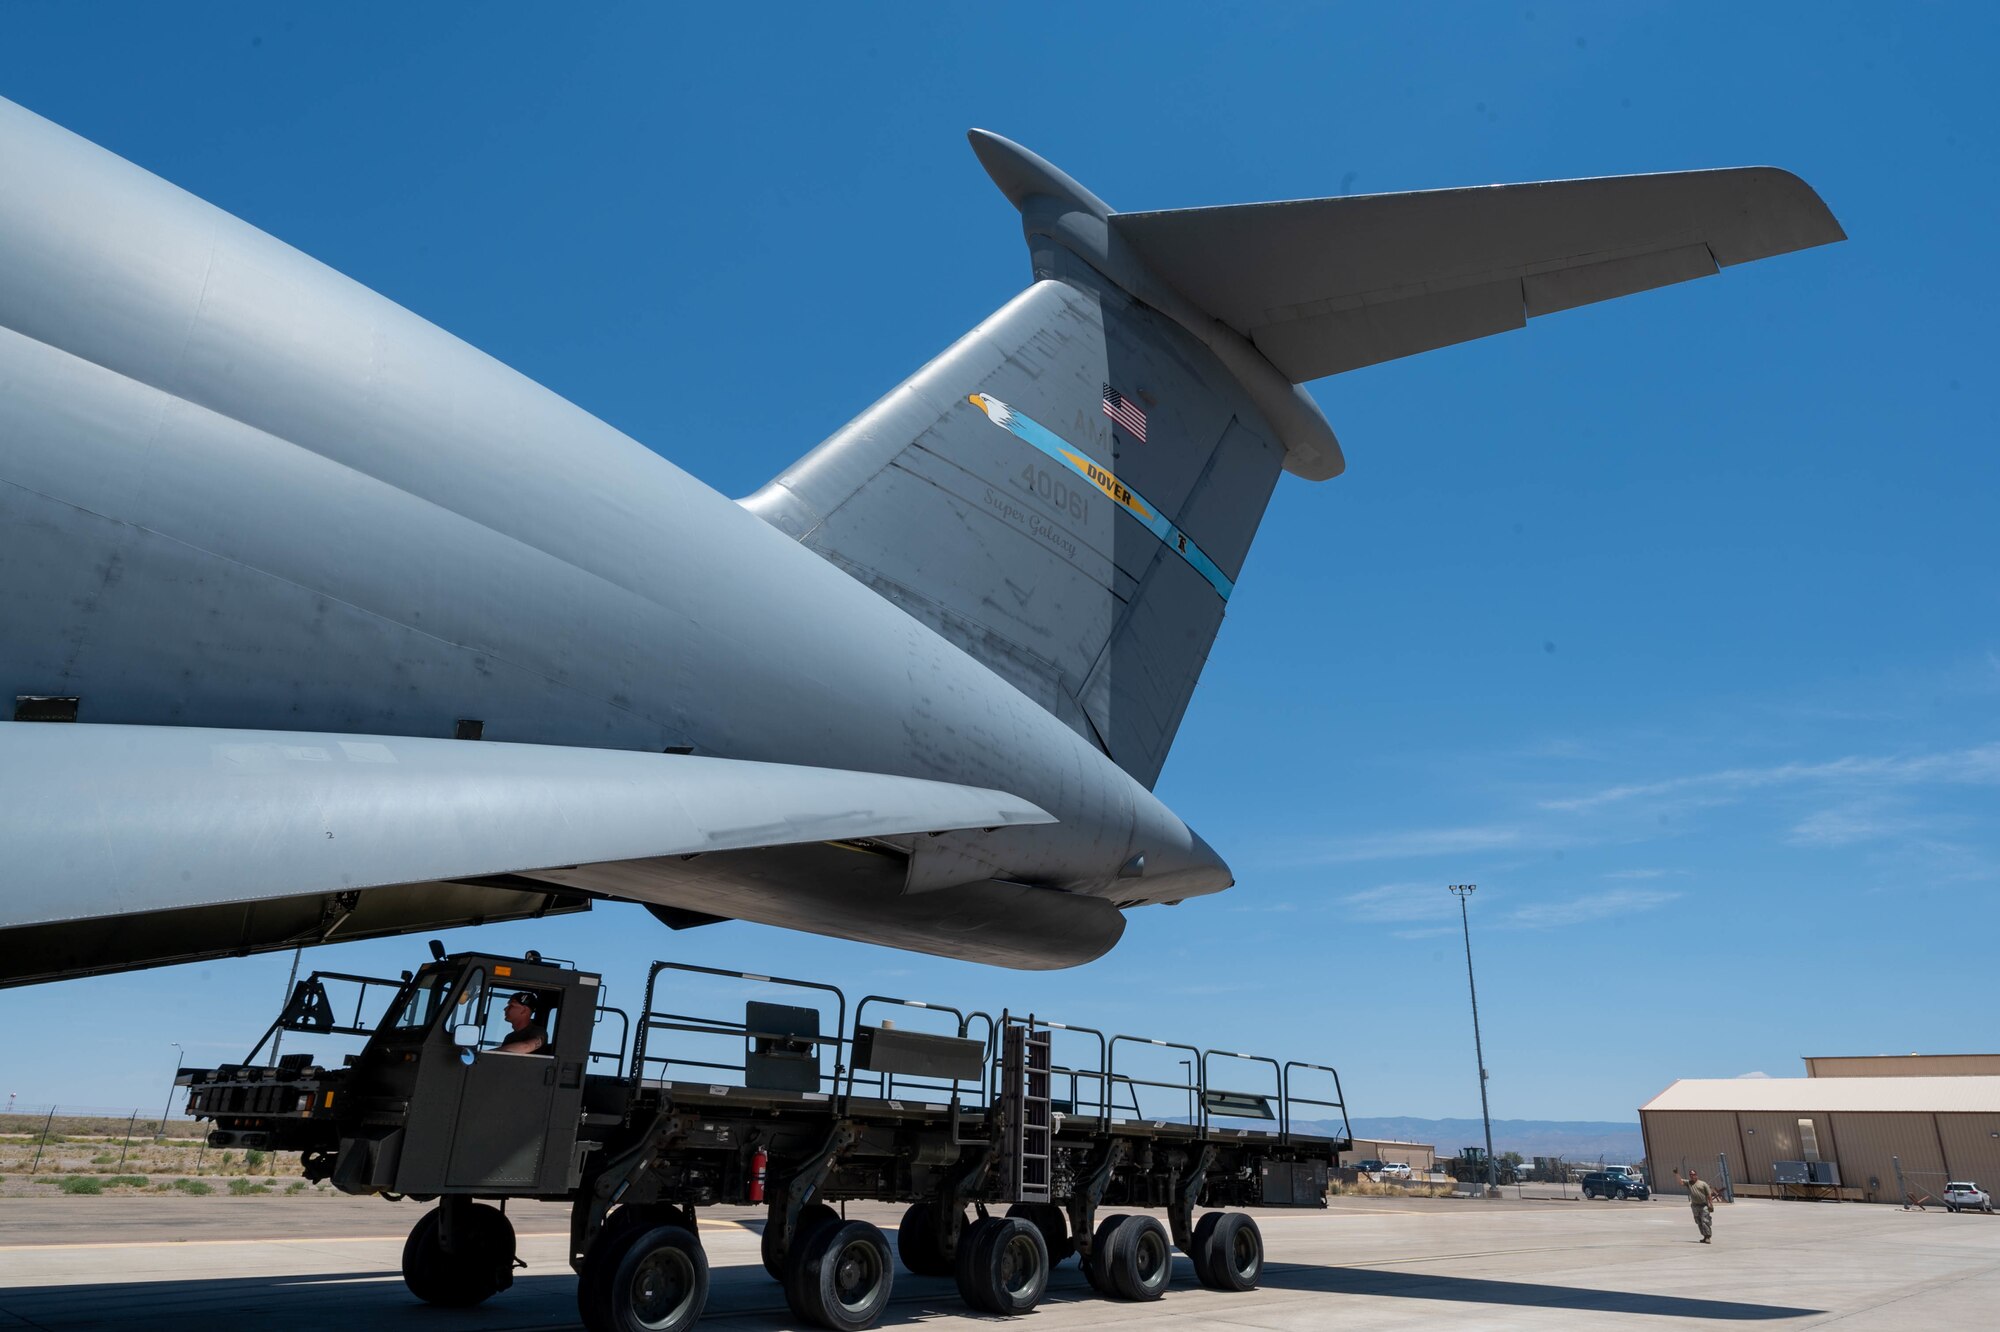 A K-loader is loaded onto a Dover Air Force Base C-5M Super Galaxy during a Major Command Service Tail Trainer at Holloman AFB, New Mexico, June 9, 2021. Loadmasters from the 9th Airlift Squadron coordinated cargo with Airmen from the 49th Wing and 635th Materiel Maintenance Group to complete the 10-day MSTT. Over the course of the training, Airmen loaded and unloaded 320,085 pounds of cargo, including palletized cargo, aircraft ground equipment, a fuel truck and a K-loader. (U.S. Air Force photo by Senior Airman Faith Schaefer)